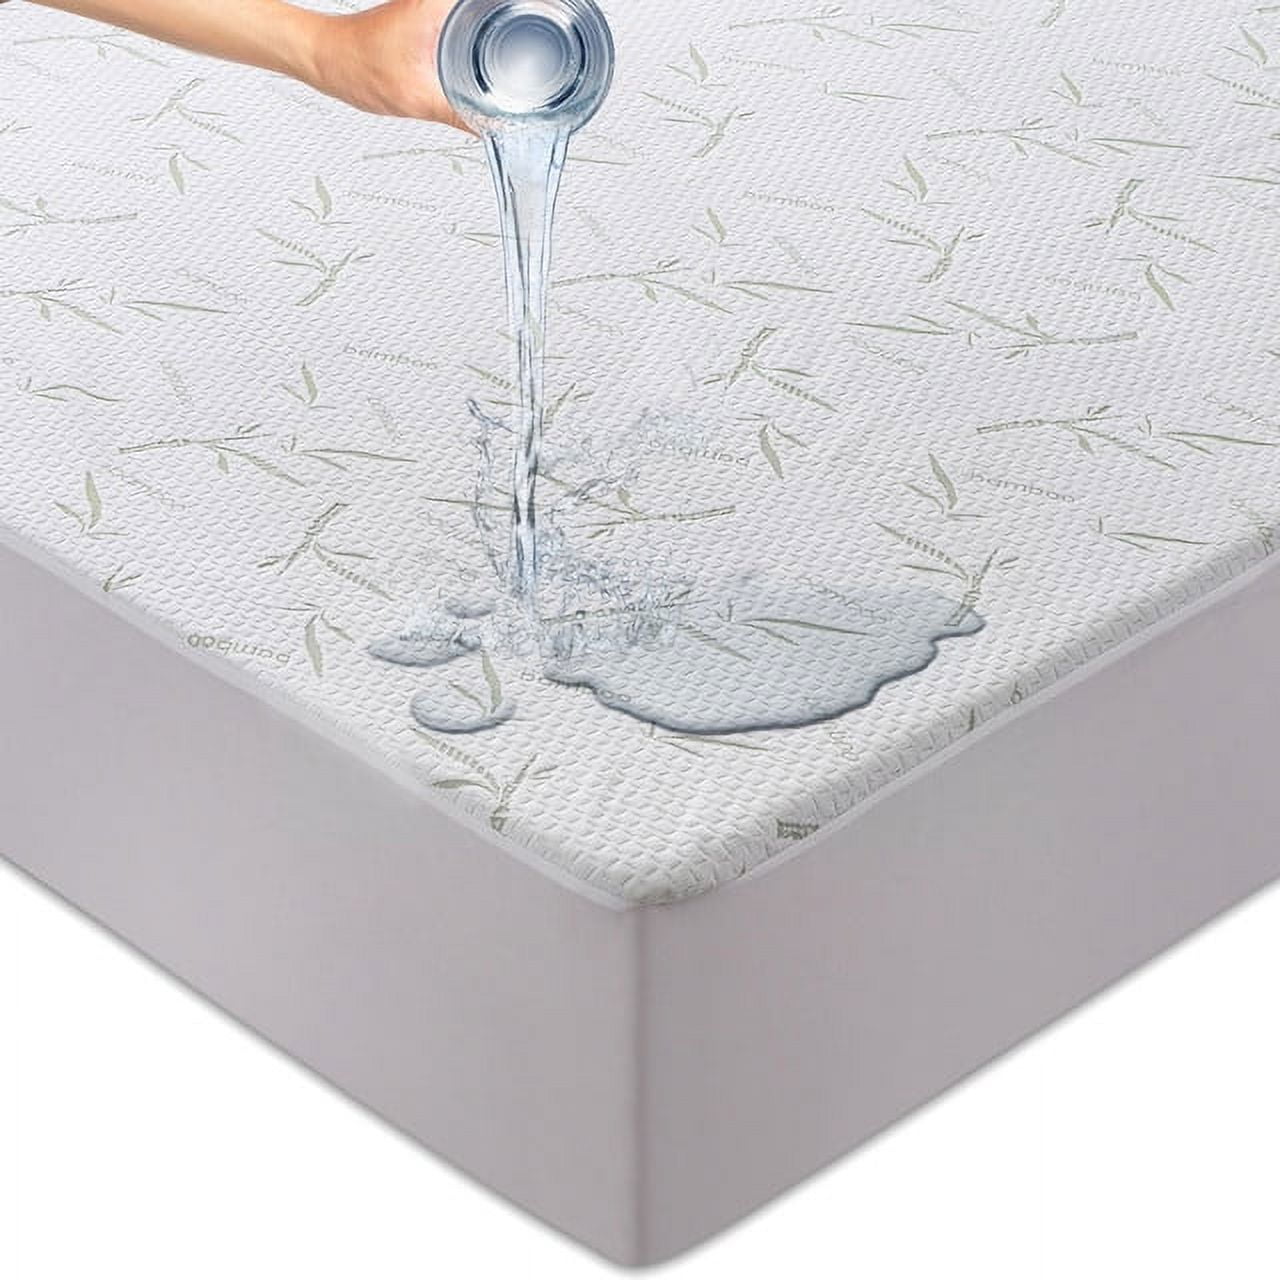 Utopia Bedding Premium Bamboo Waterproof Mattress Protector Queen 340 GSM Fits 17 Inches Deep Easy Care, White